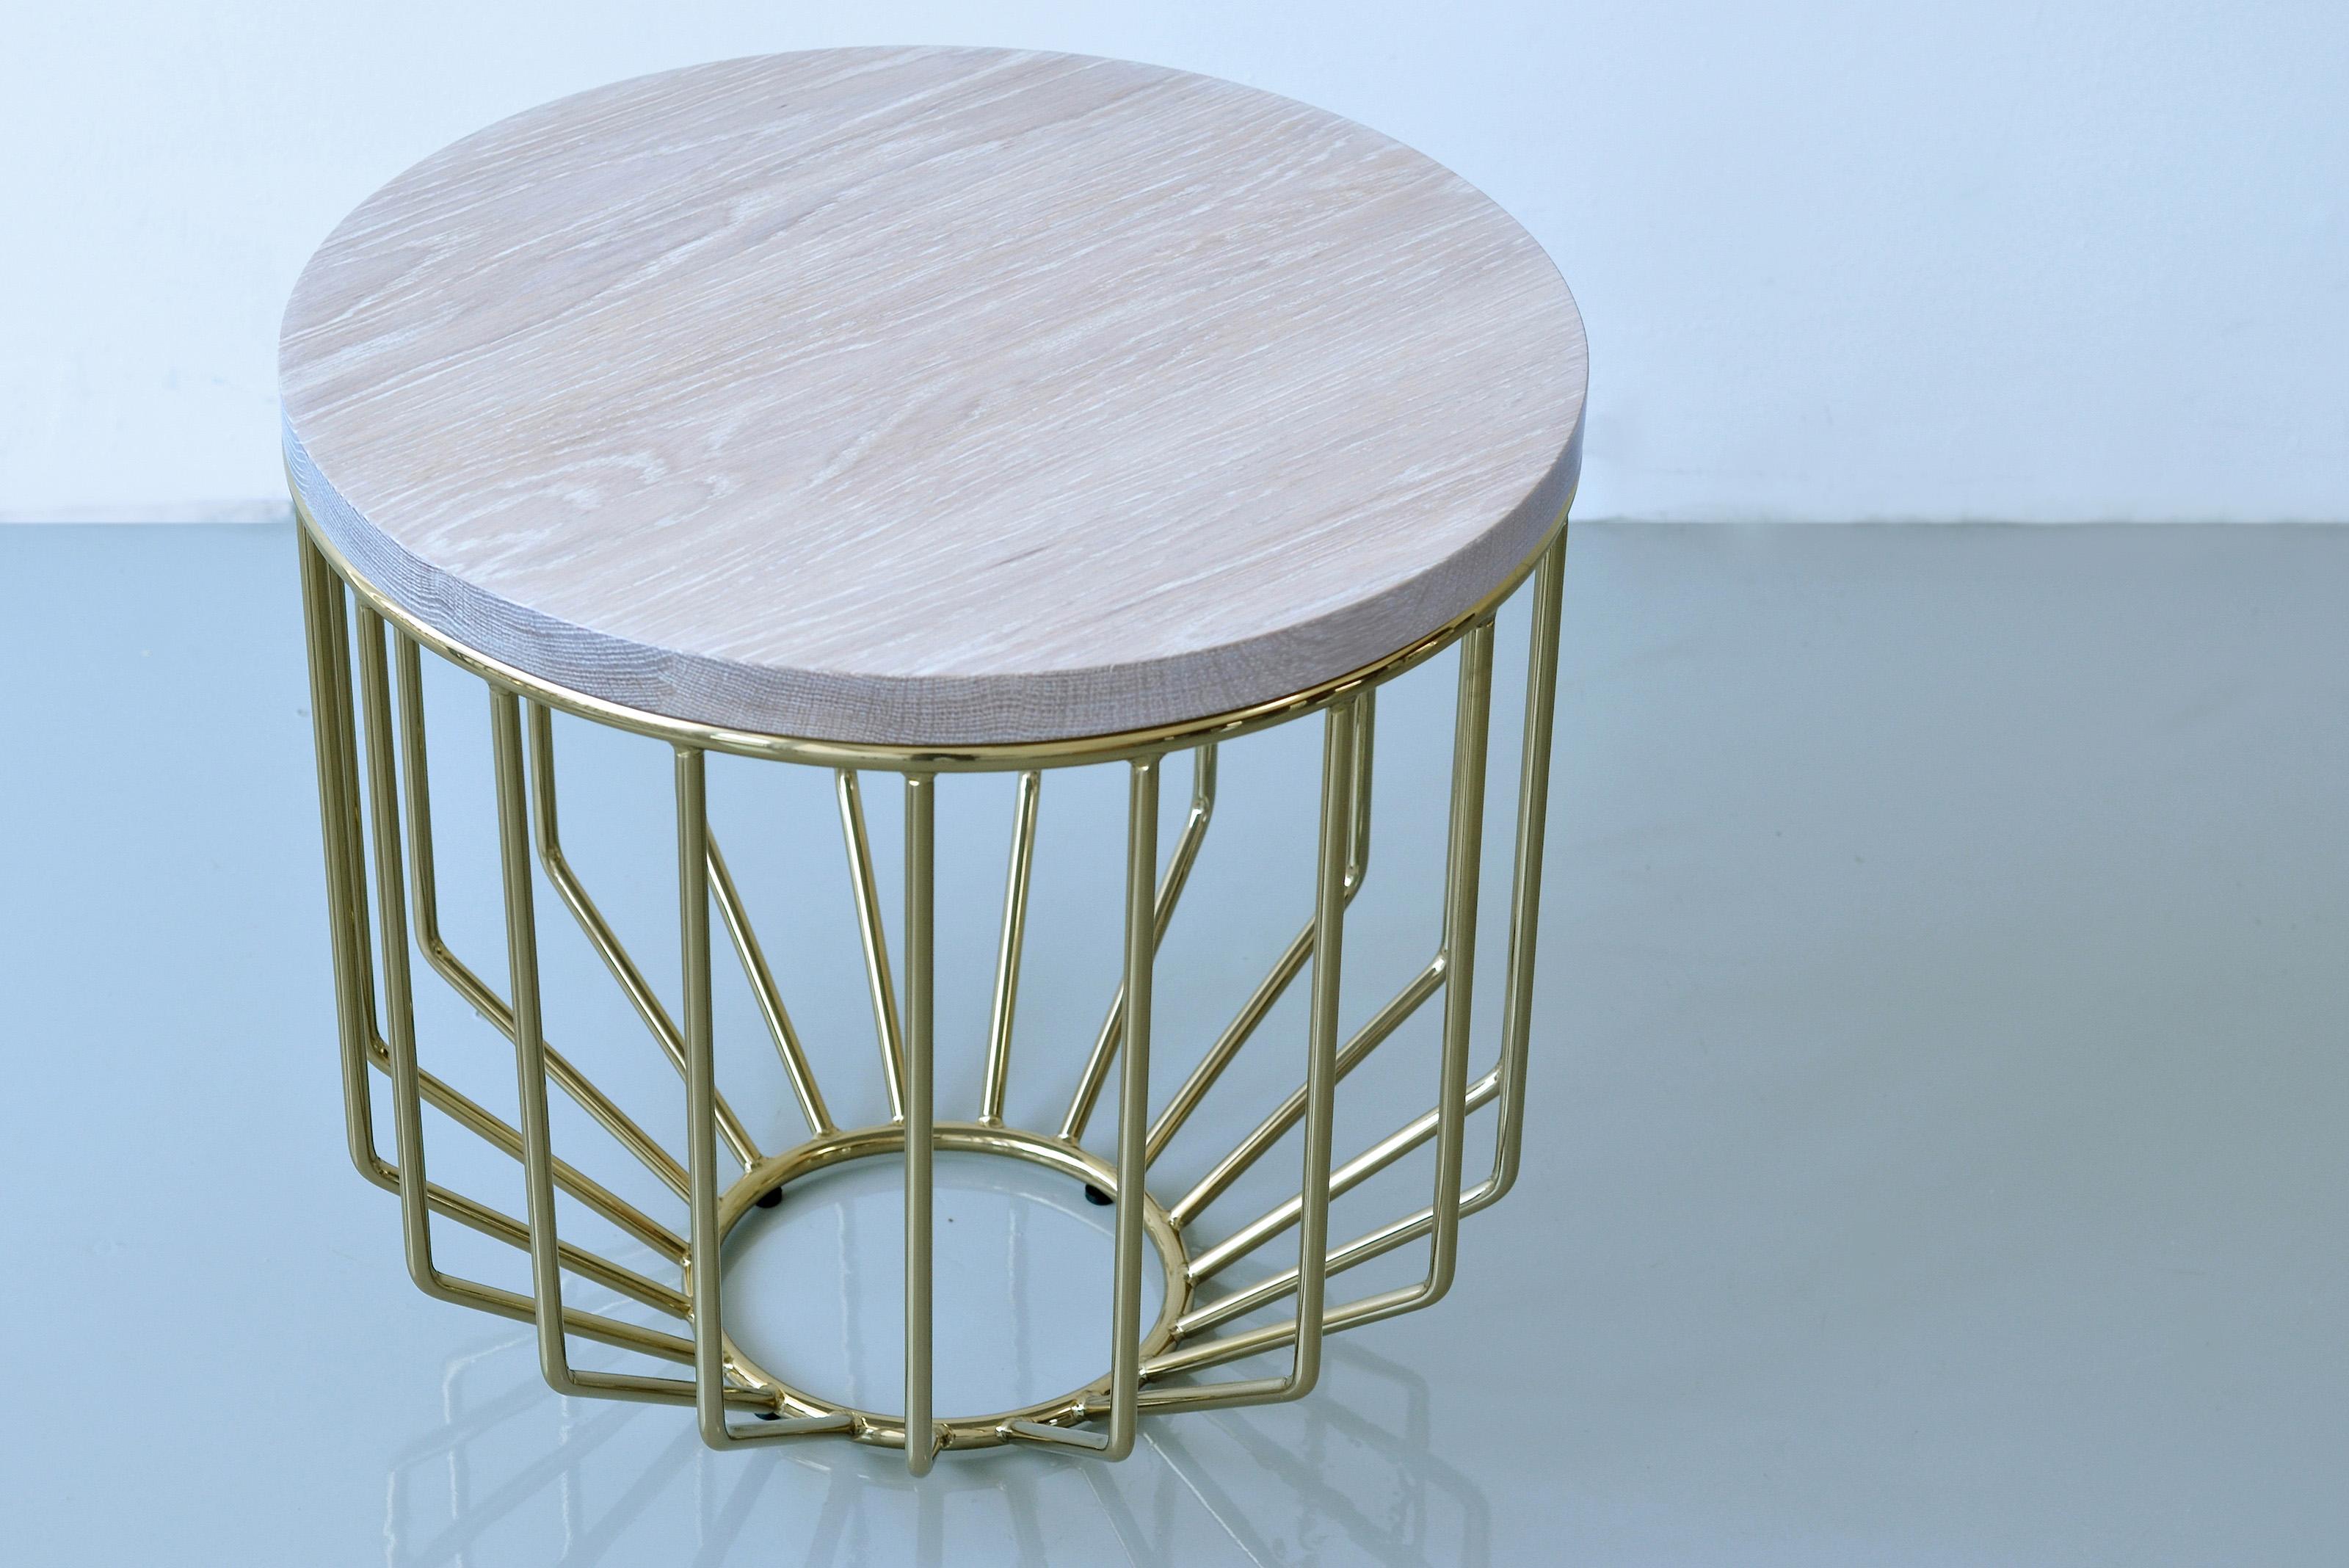 Wired Side Table by Phase Design
Dimensions: Ø 45.7 x H 43.2 cm. 
Materials: White oak and smoked brass.

Solid steel bar with solid wooden tops, available in walnut, white oak, or ebonized oak. Steel available in gloss or flat black and white